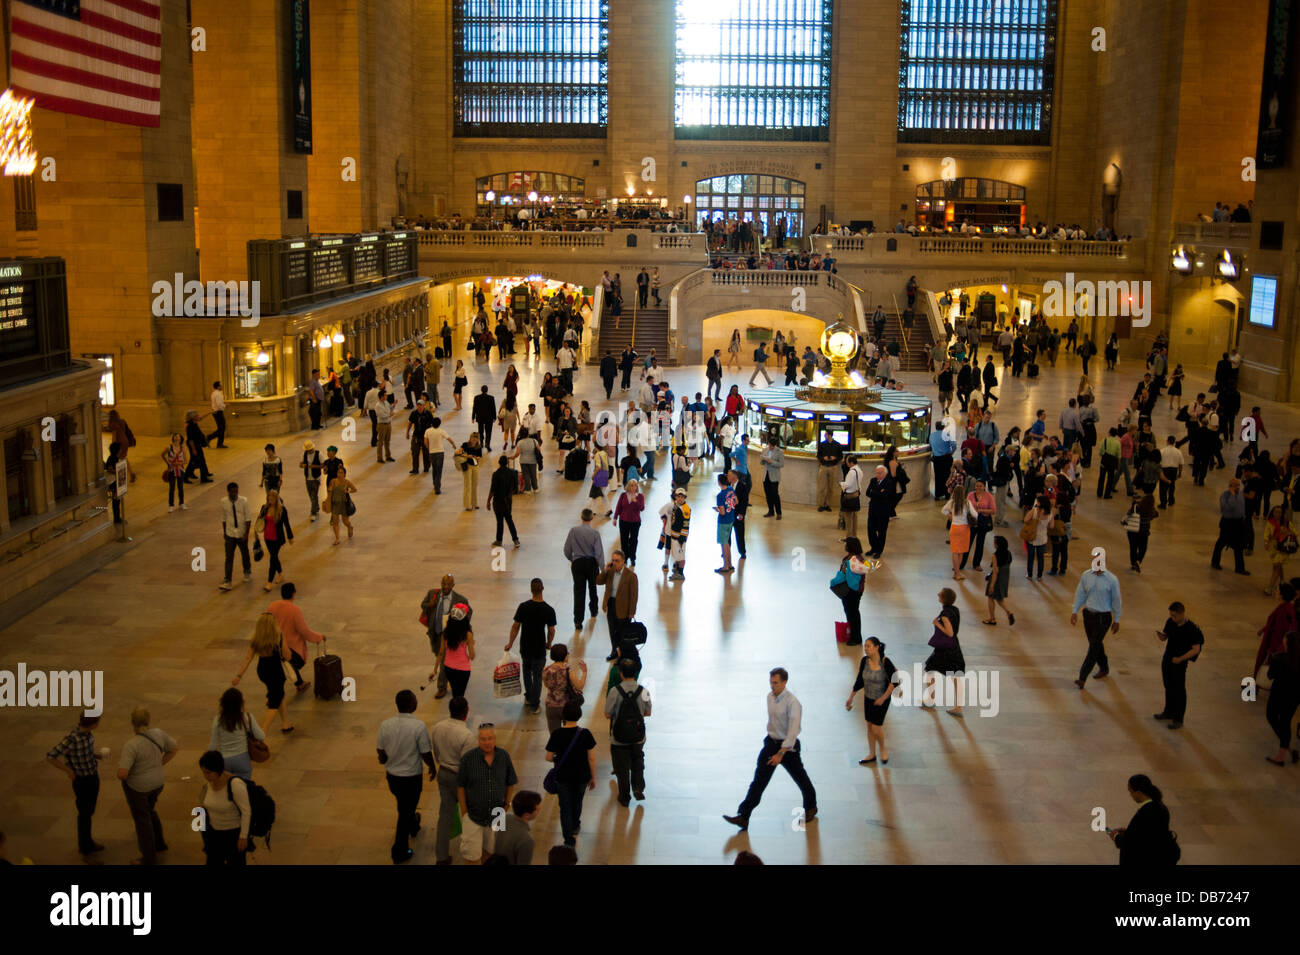 People / travelers in Grand Central Station, New York City Stock Photo